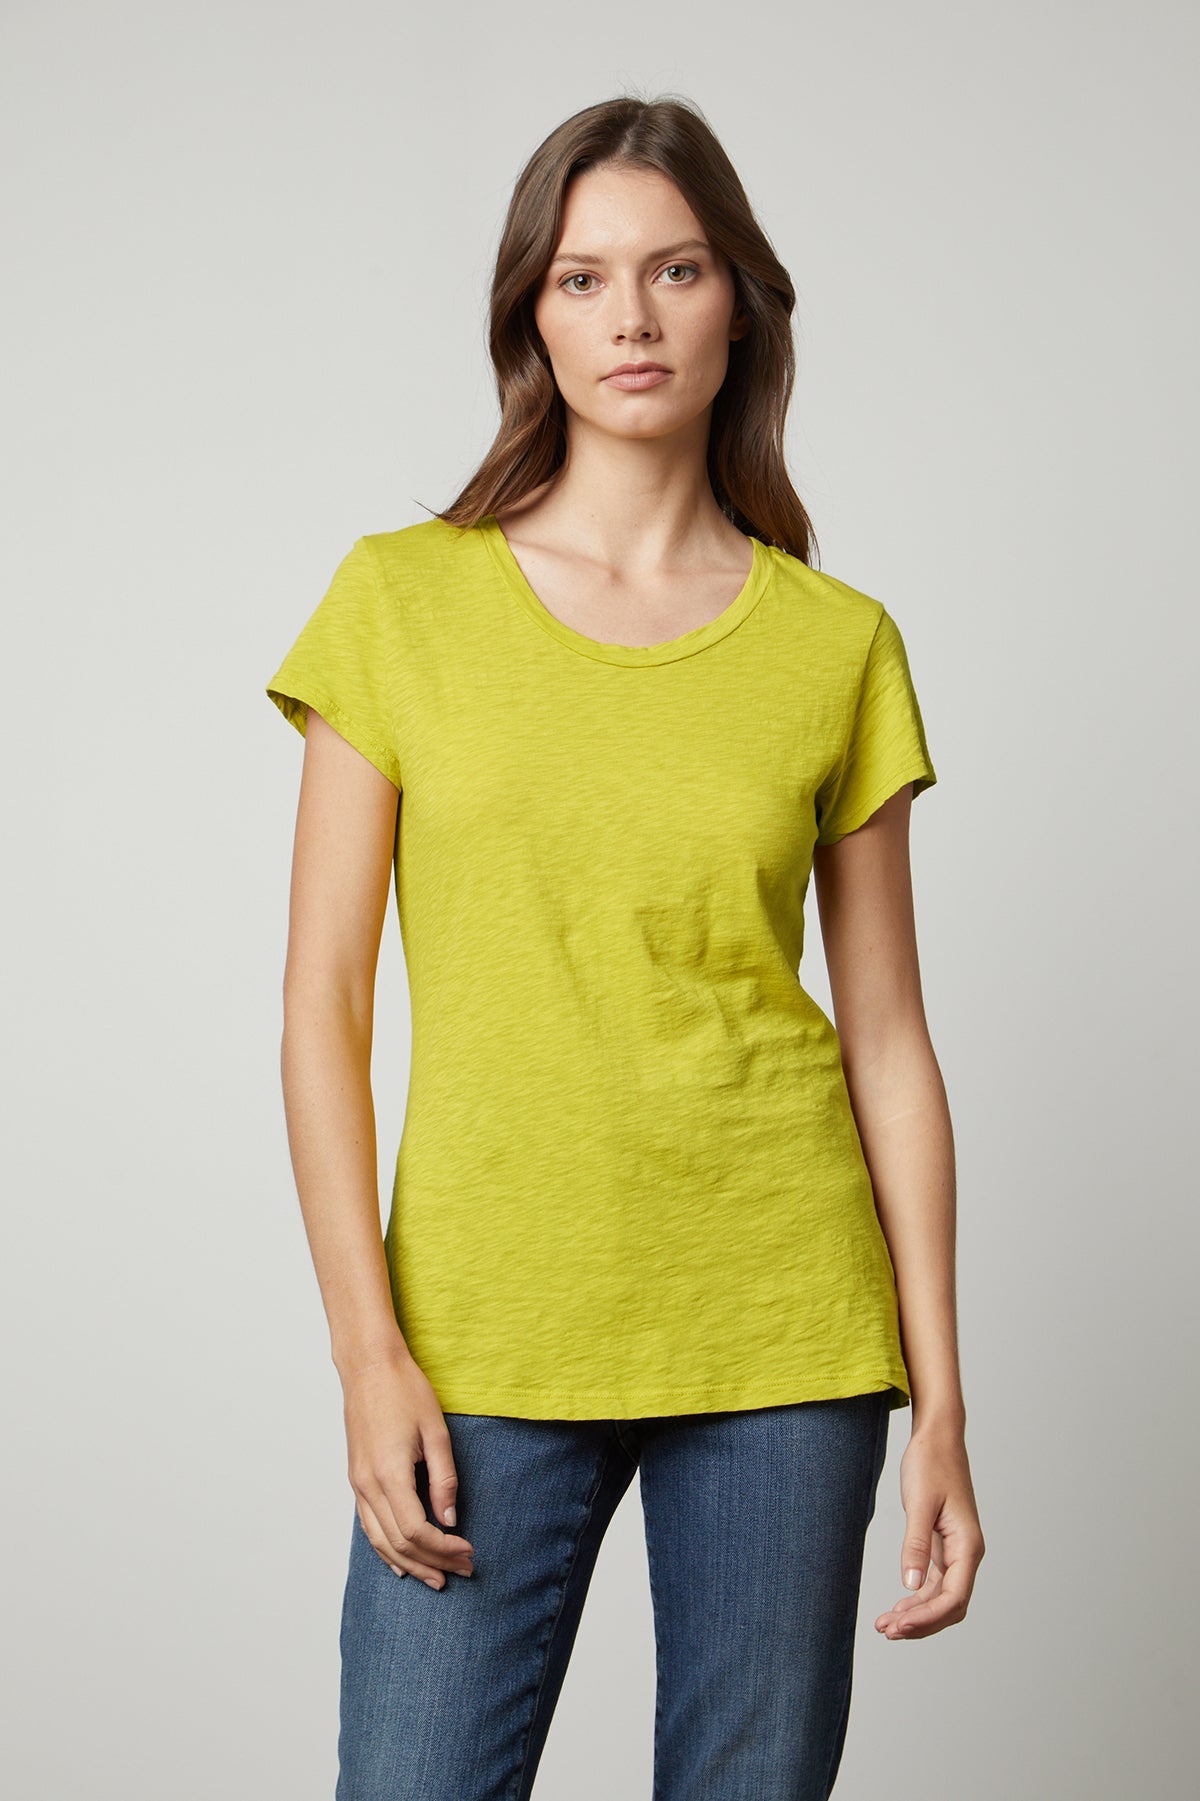 A woman wearing a yellow Velvet by Graham & Spencer ODELIA COTTON SLUB CREW NECK TEE and jeans.-35206800834753